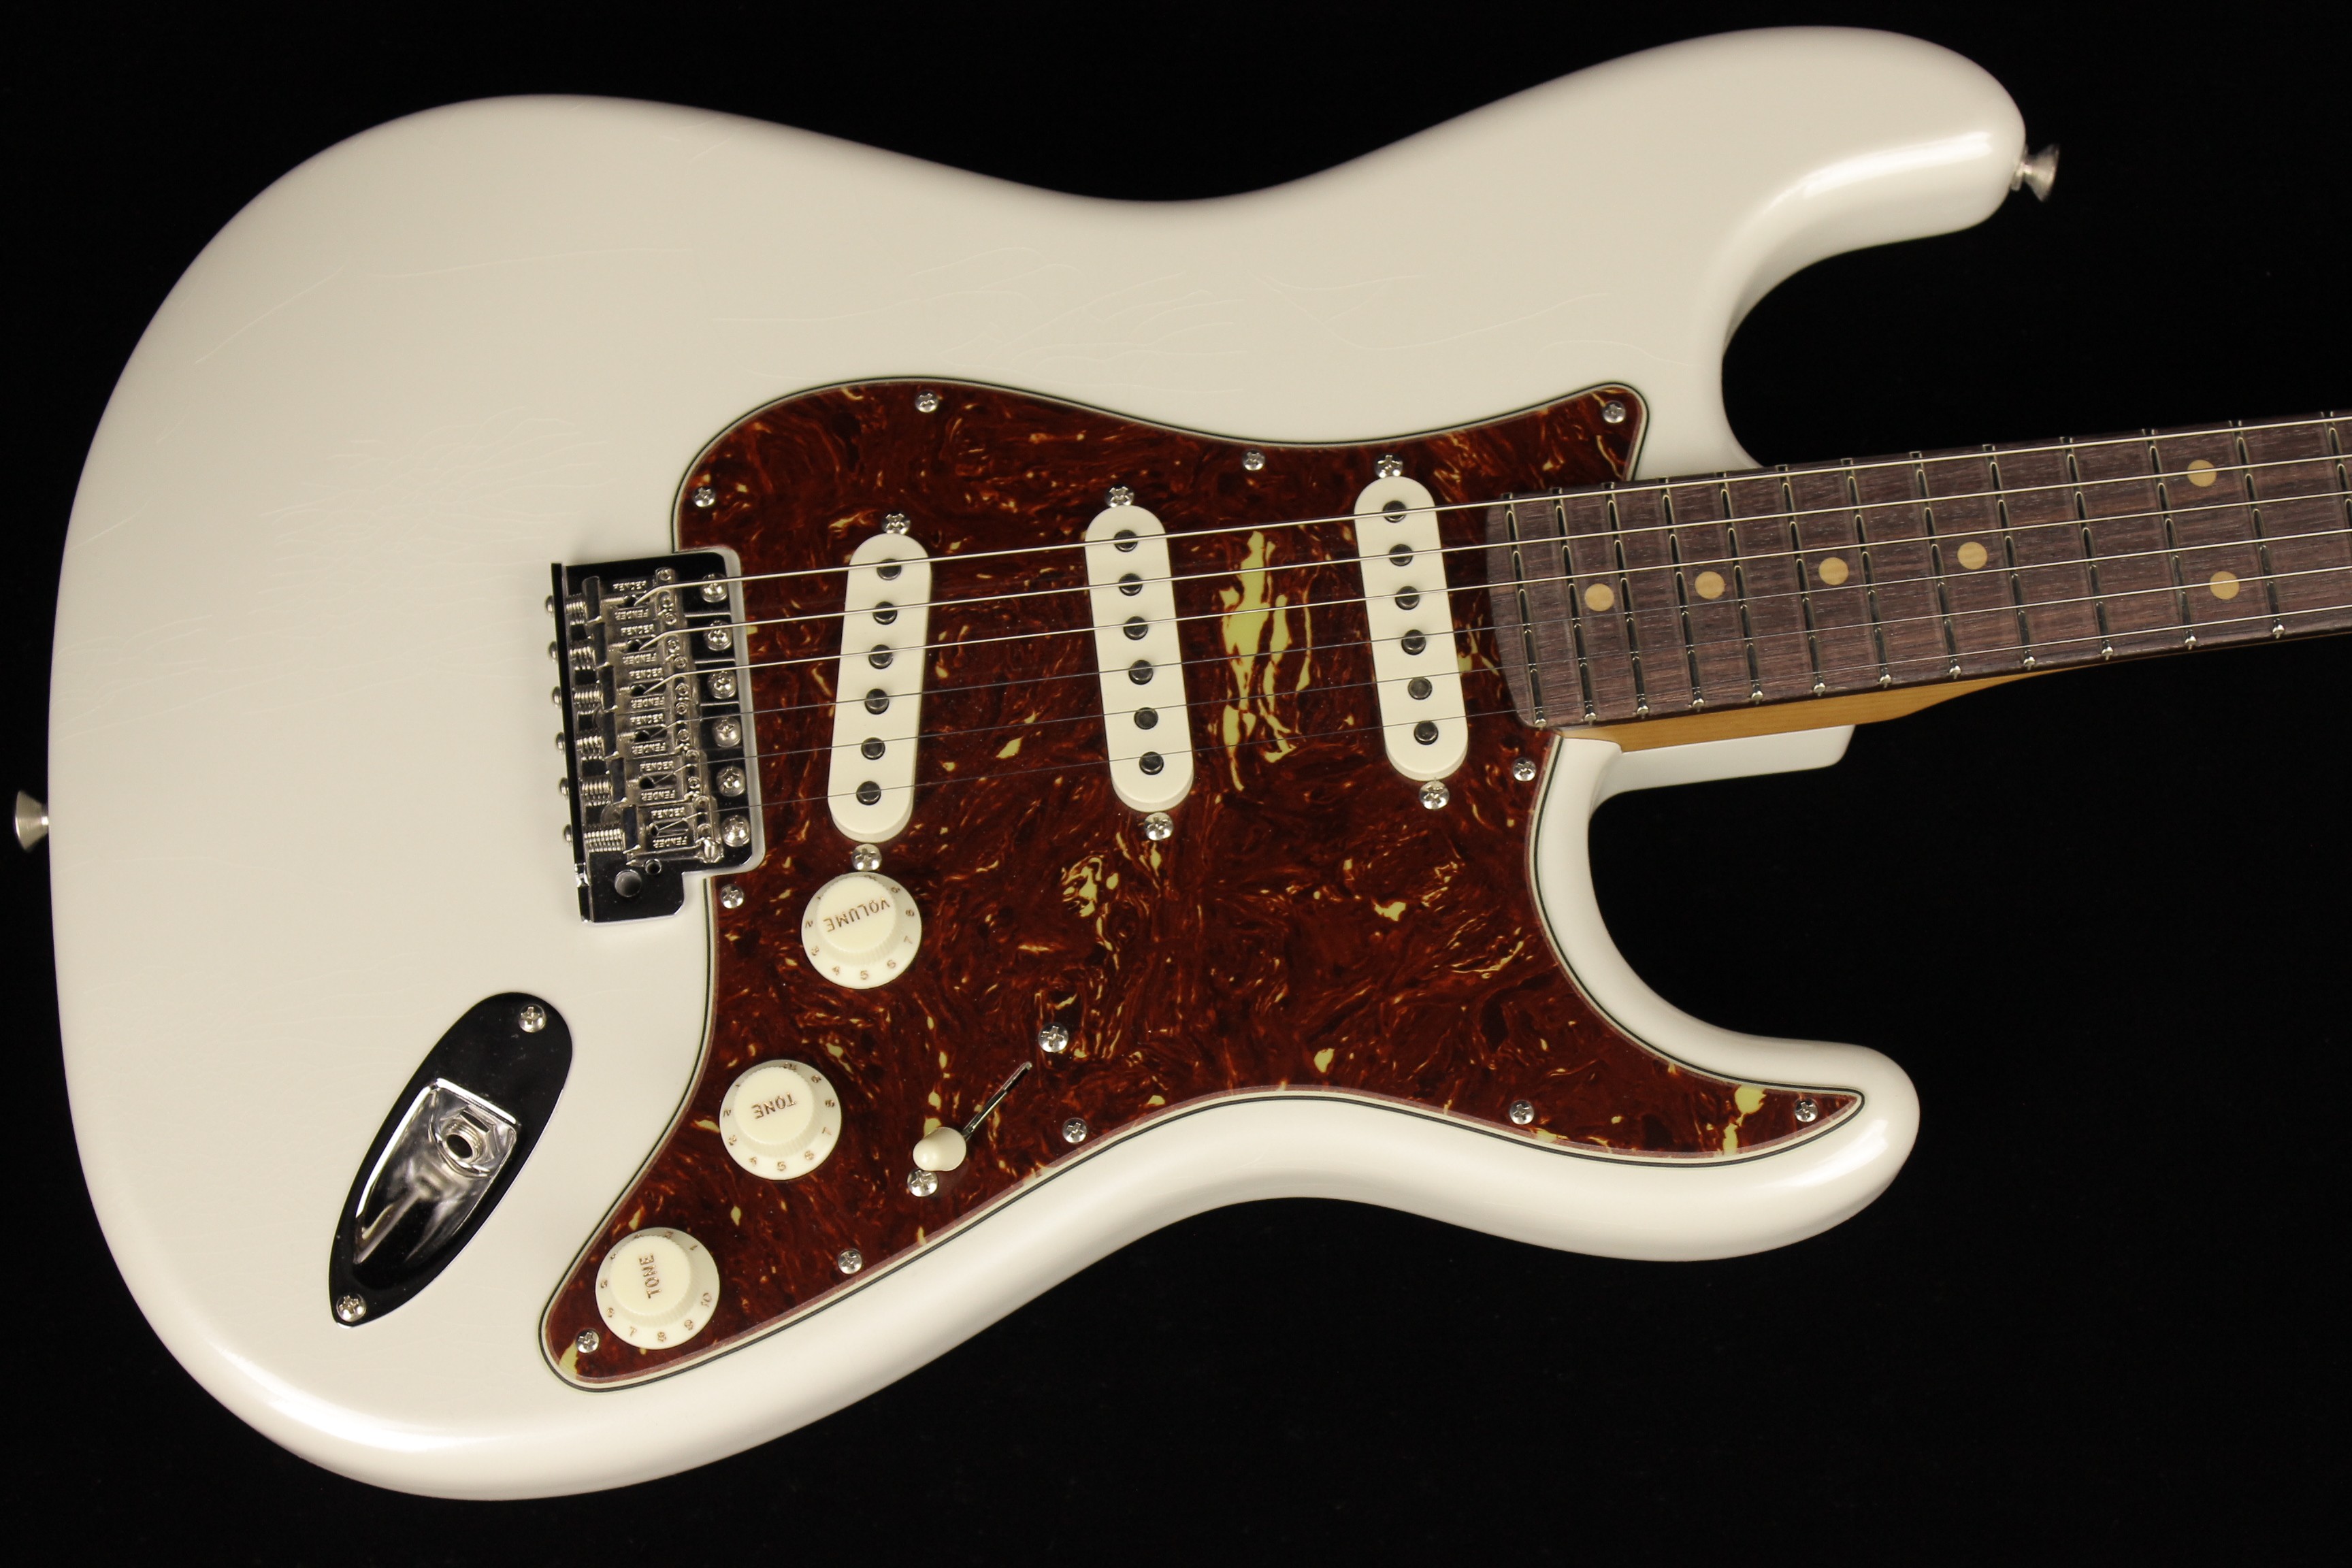 Fender American Vintage II 1961 Stratocaster Review: Closet Classic